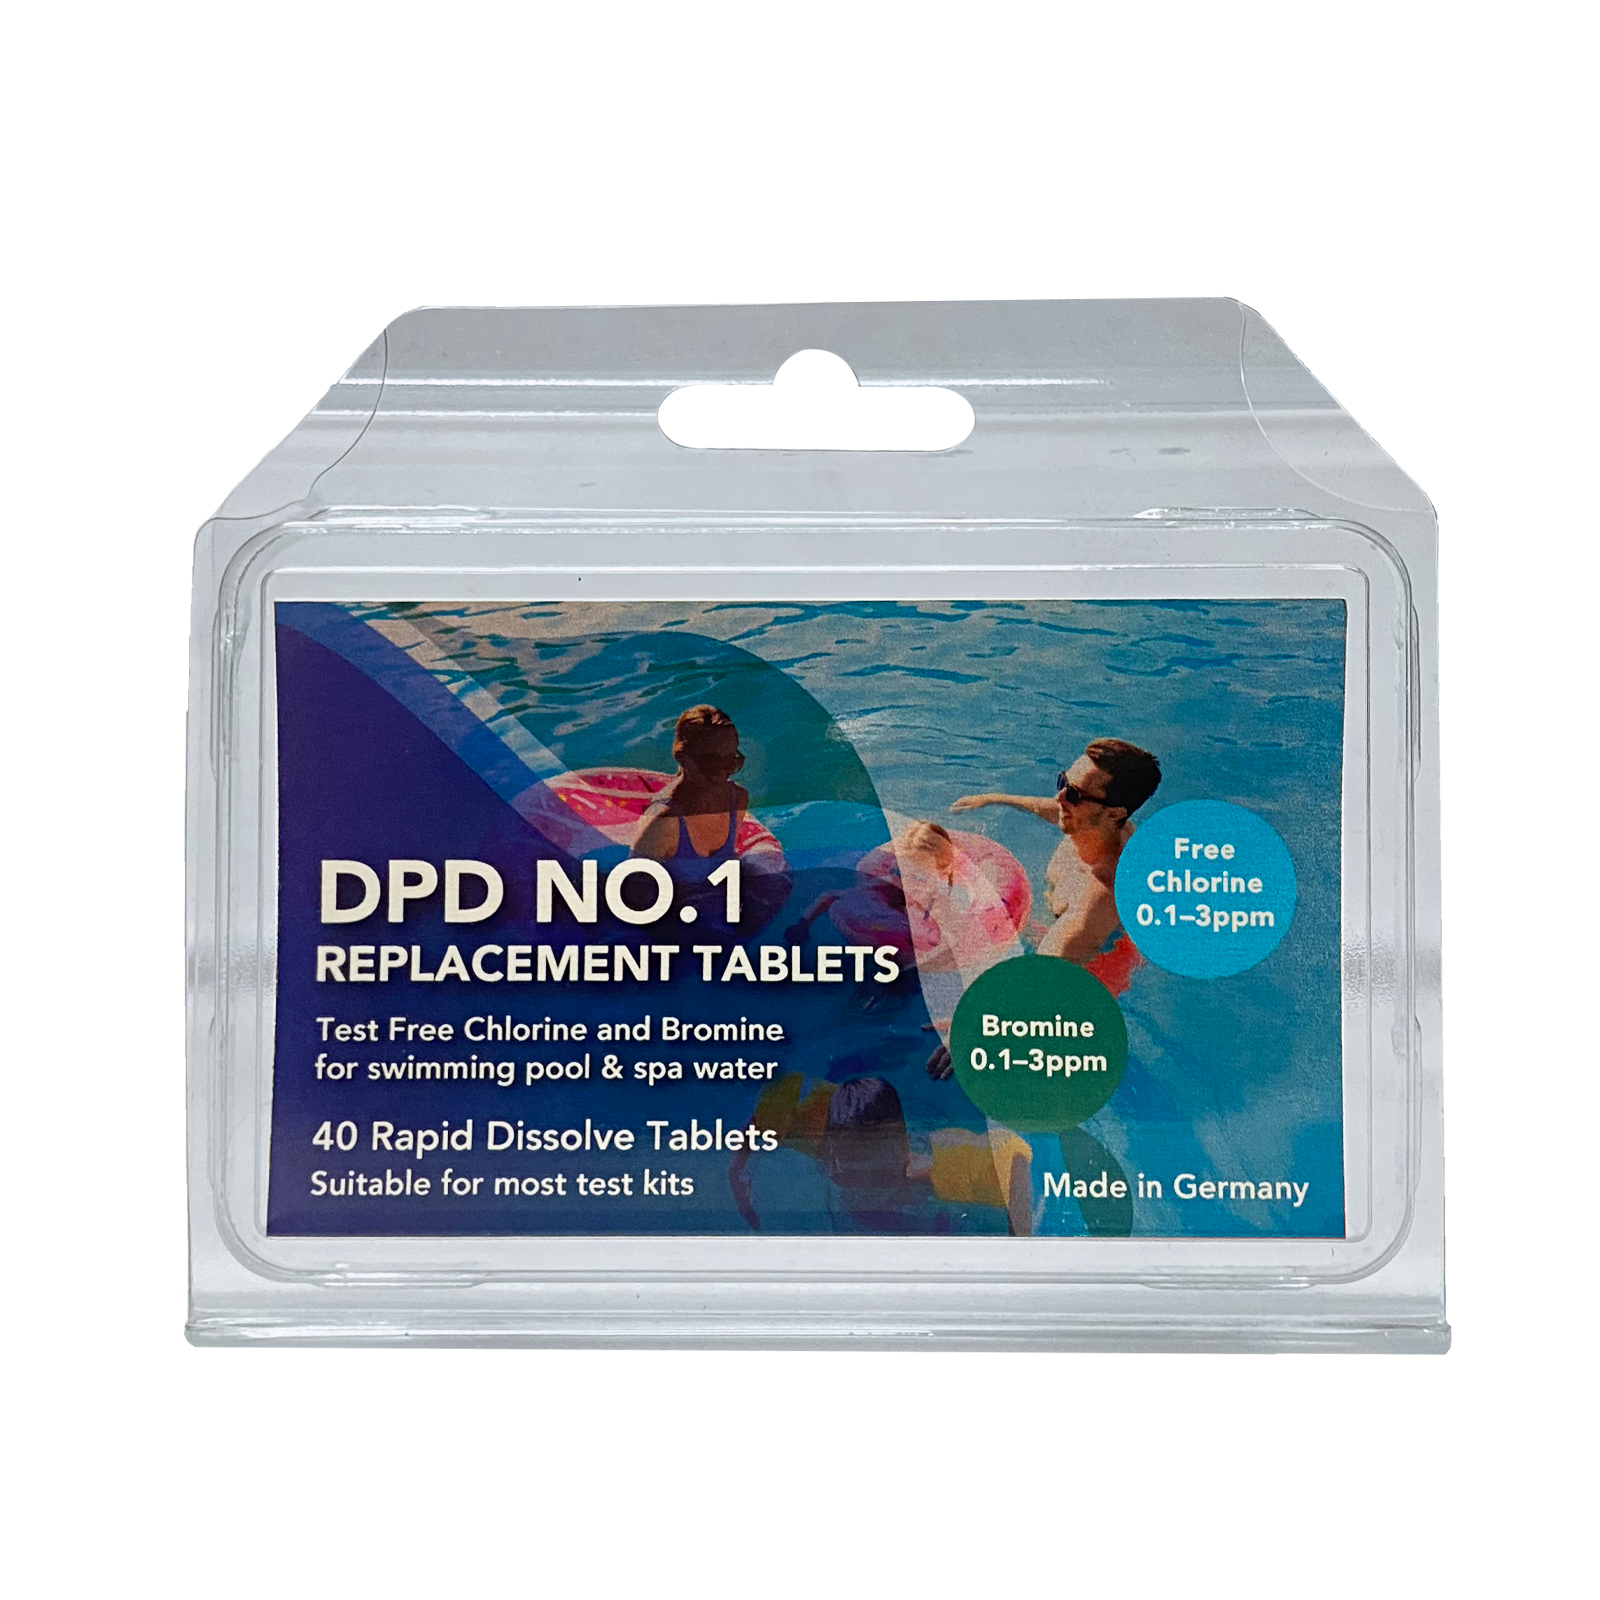 DPD NO.1 REPLACEMENT TABLETS